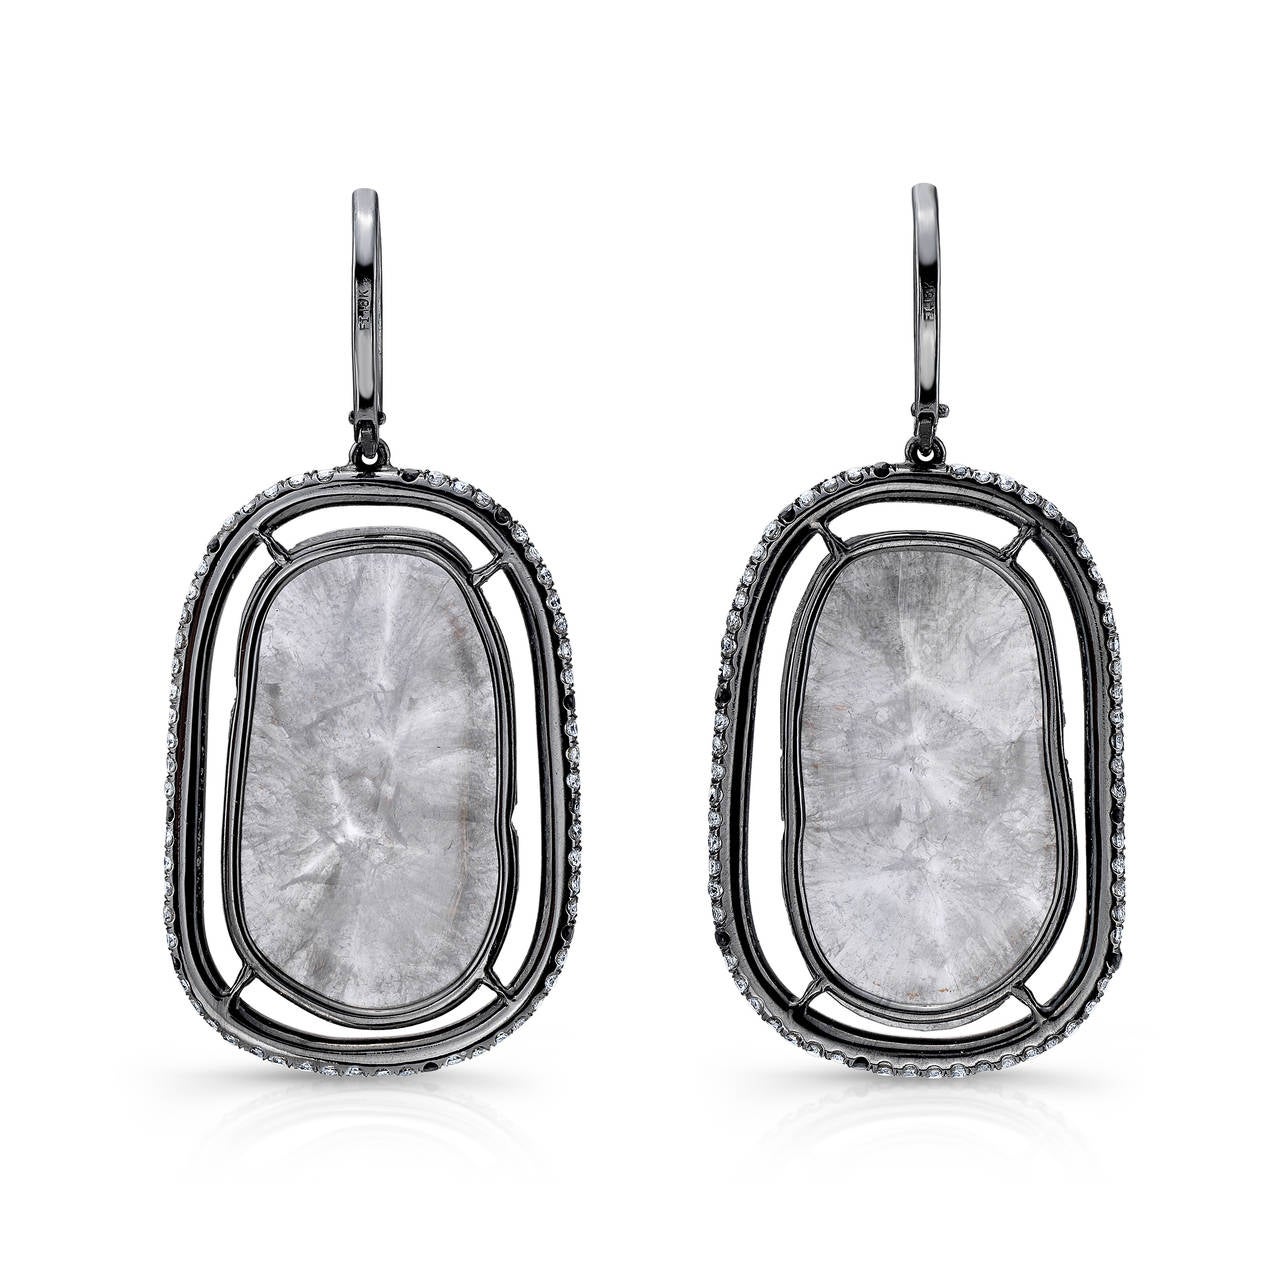 Beautifully faceted milky grey diamond slices resting in a suspended prong setting surrounded with black, champagne and white diamond micro pave. 18 karat blackened white gold.  One of a kind. Diamond Slices, also known as flat diamonds, are a